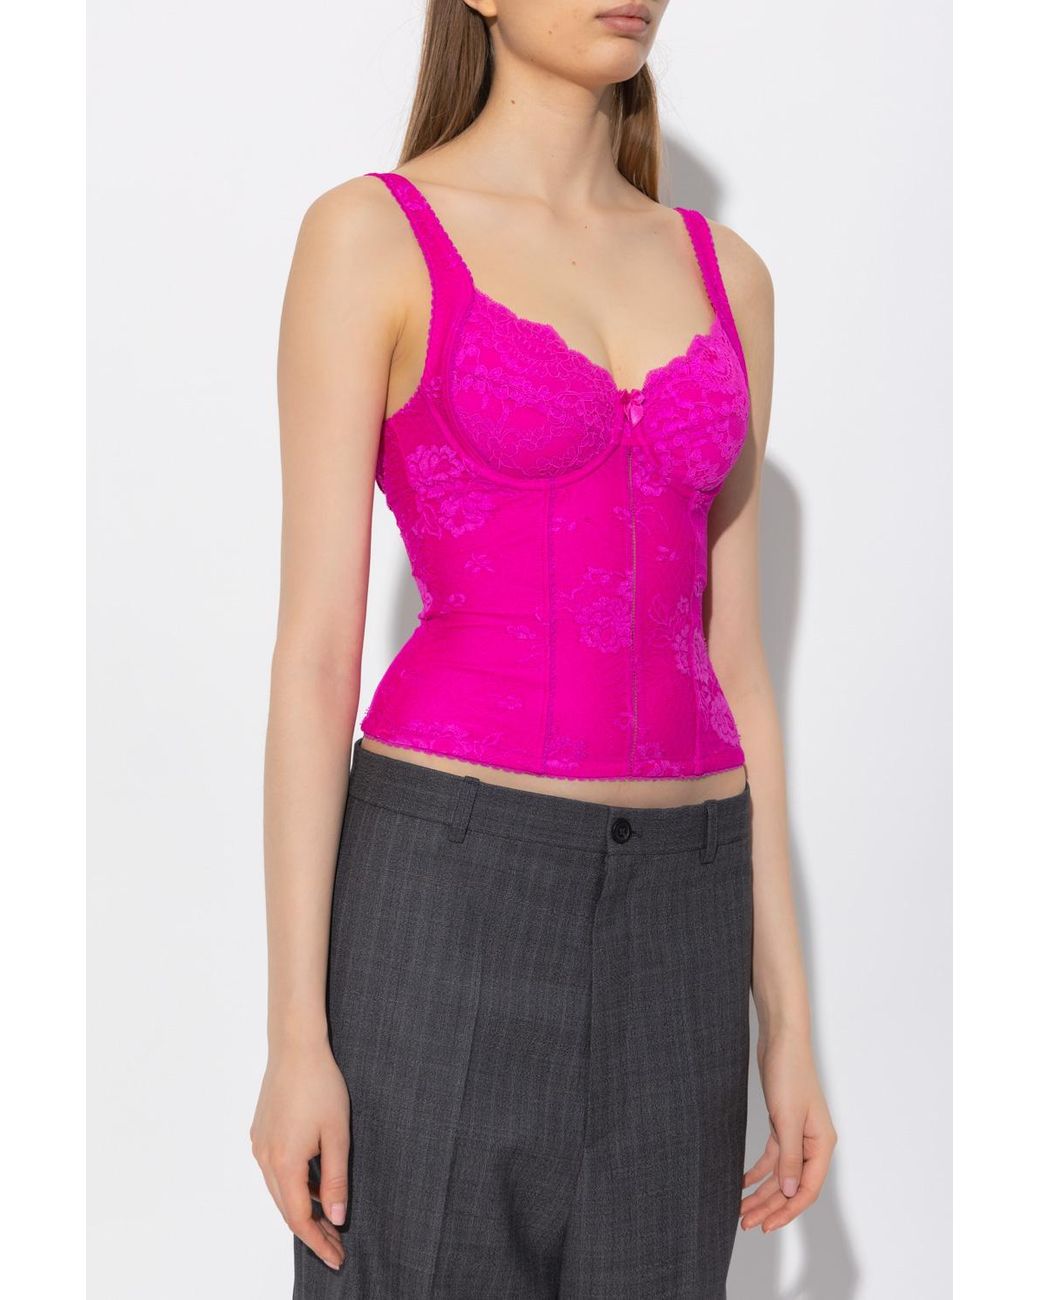 Balenciaga Lace Tank Top in Neon (Pink) | Lyst